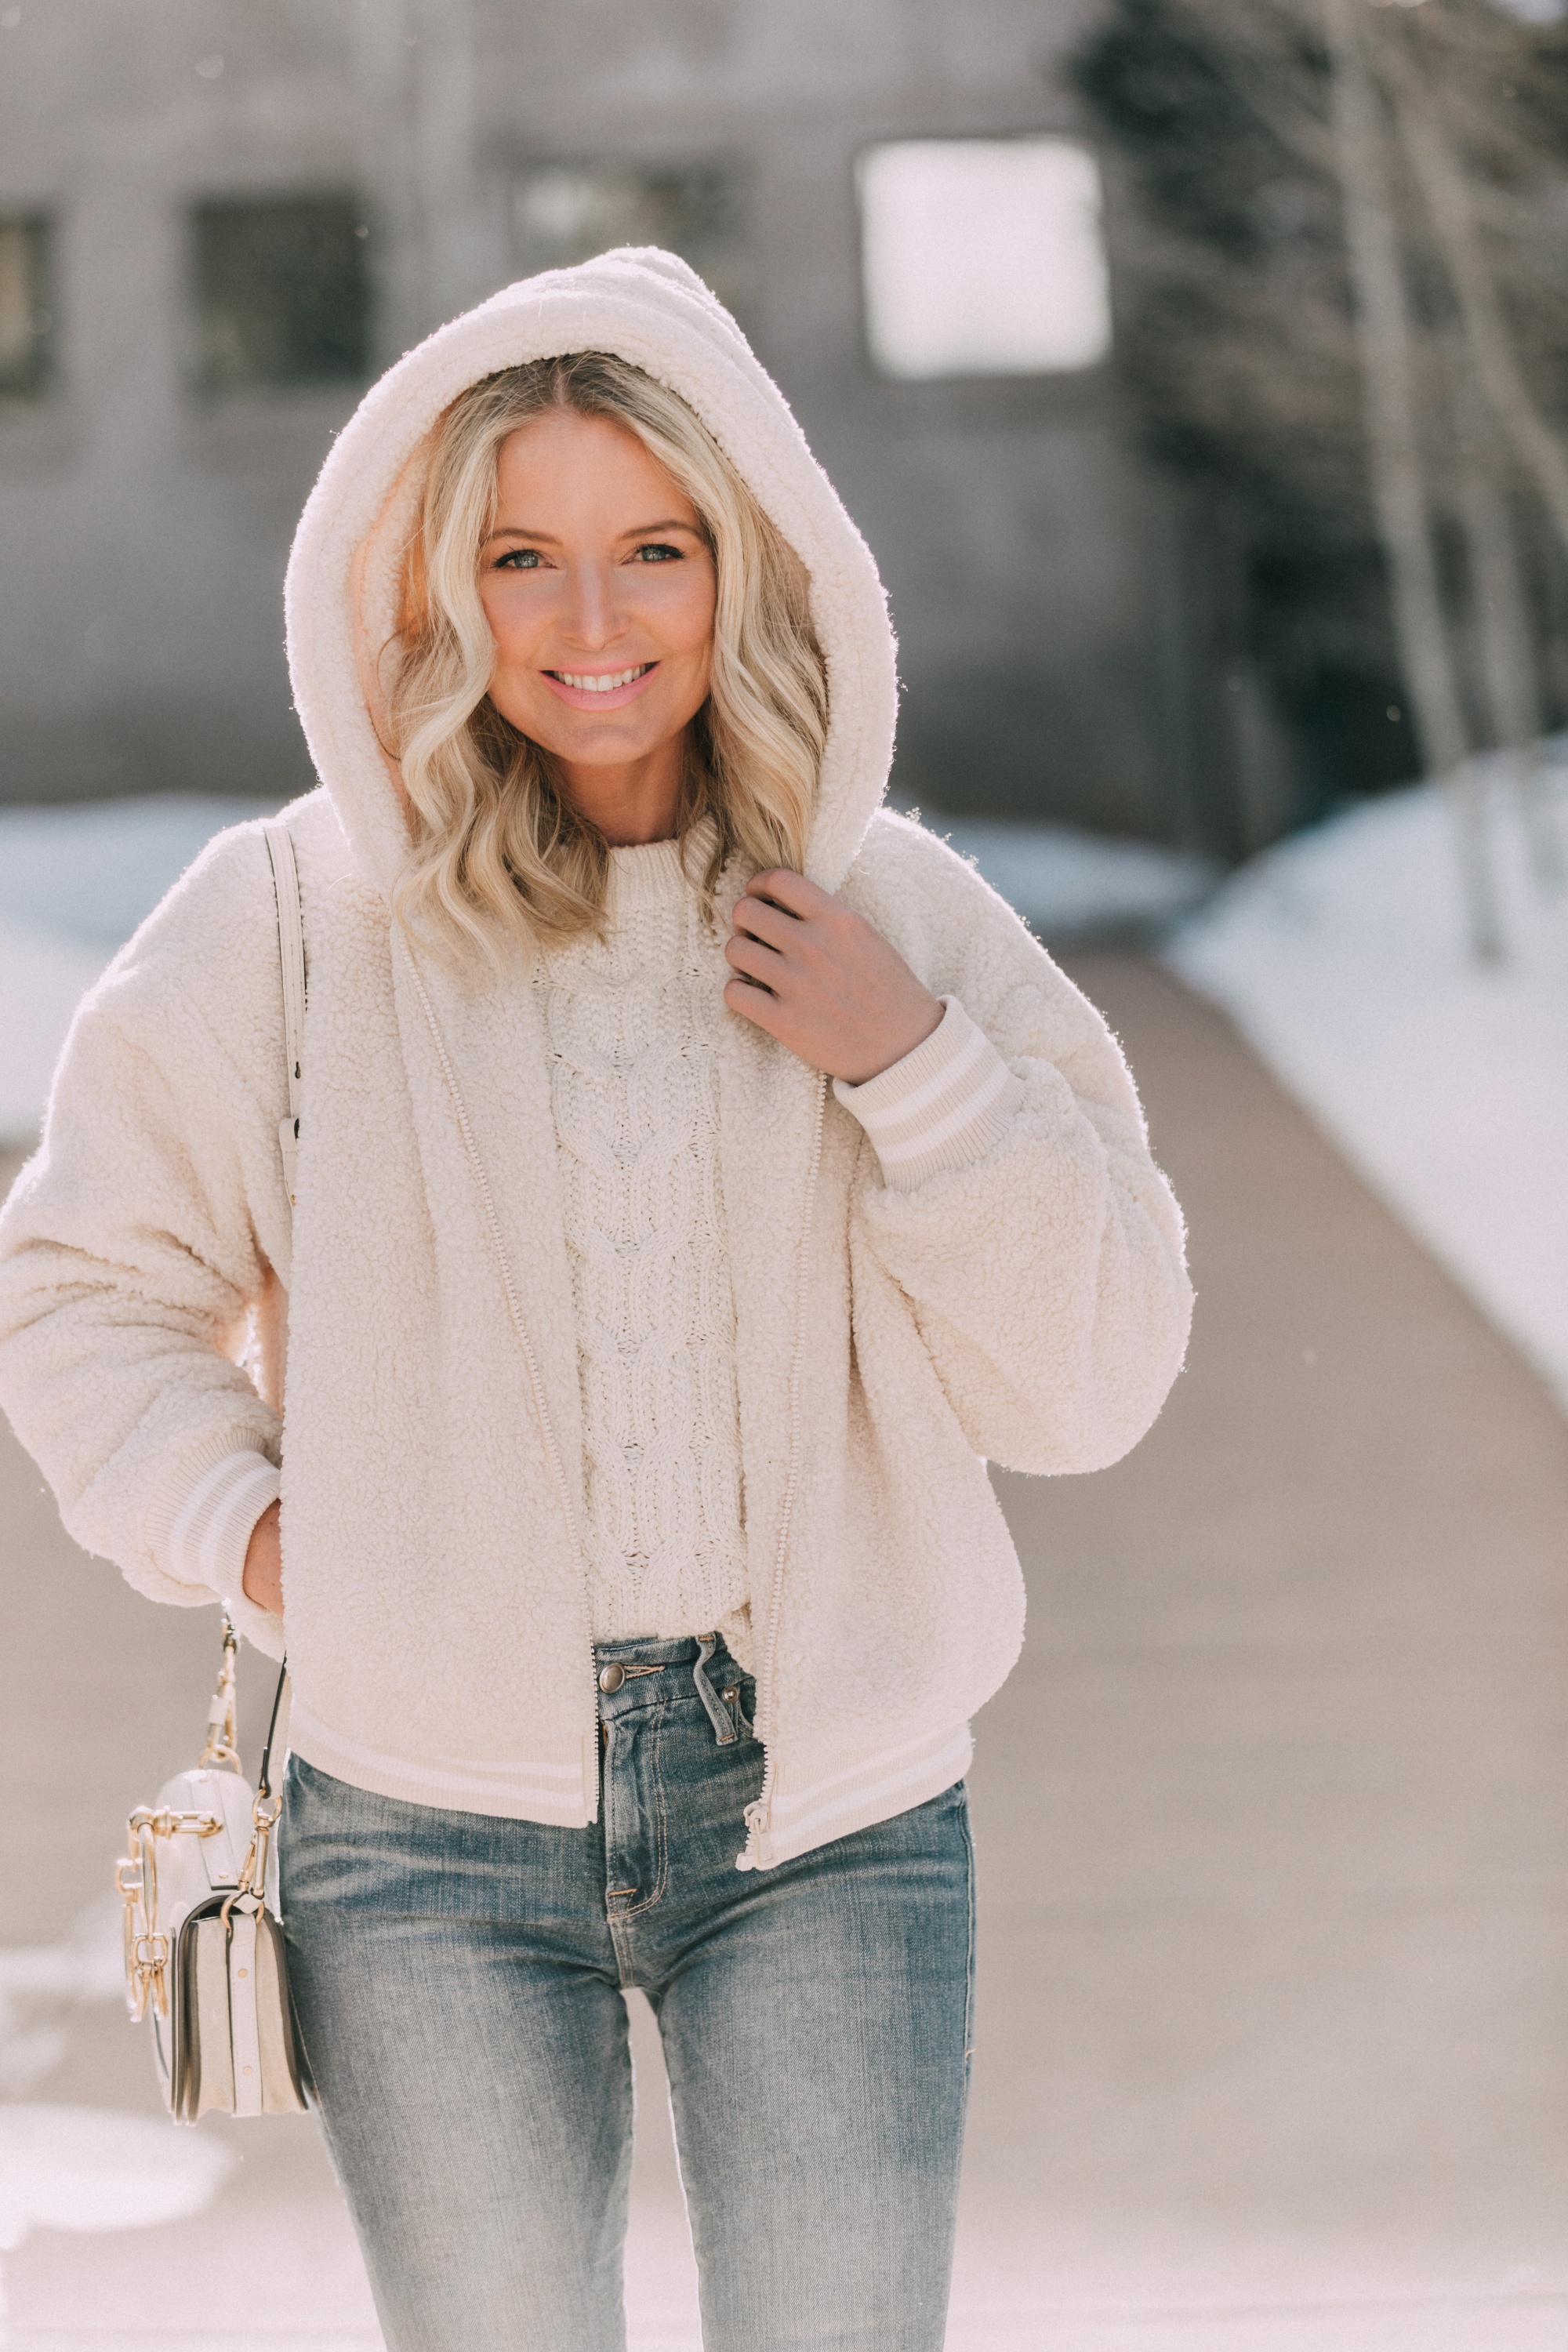 walmart fashion blogger wearing cozy faux fur teddy Scoop jacket, white Scoop cable knit sweater, medium wash skinny jeans